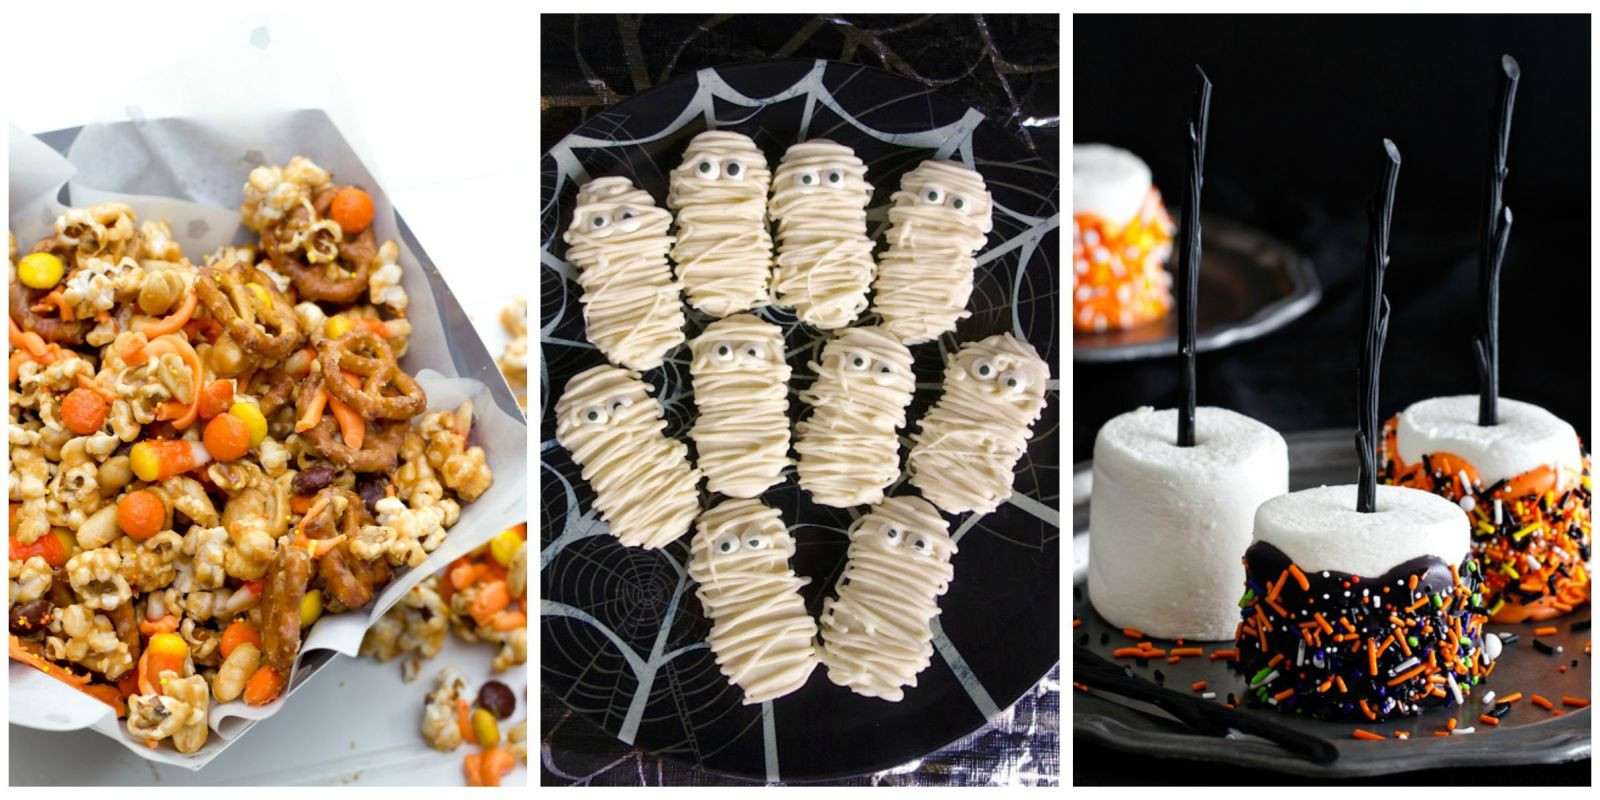 Halloween Work Party Ideas
 22 Easy Halloween Party Food Ideas Cute Recipes for